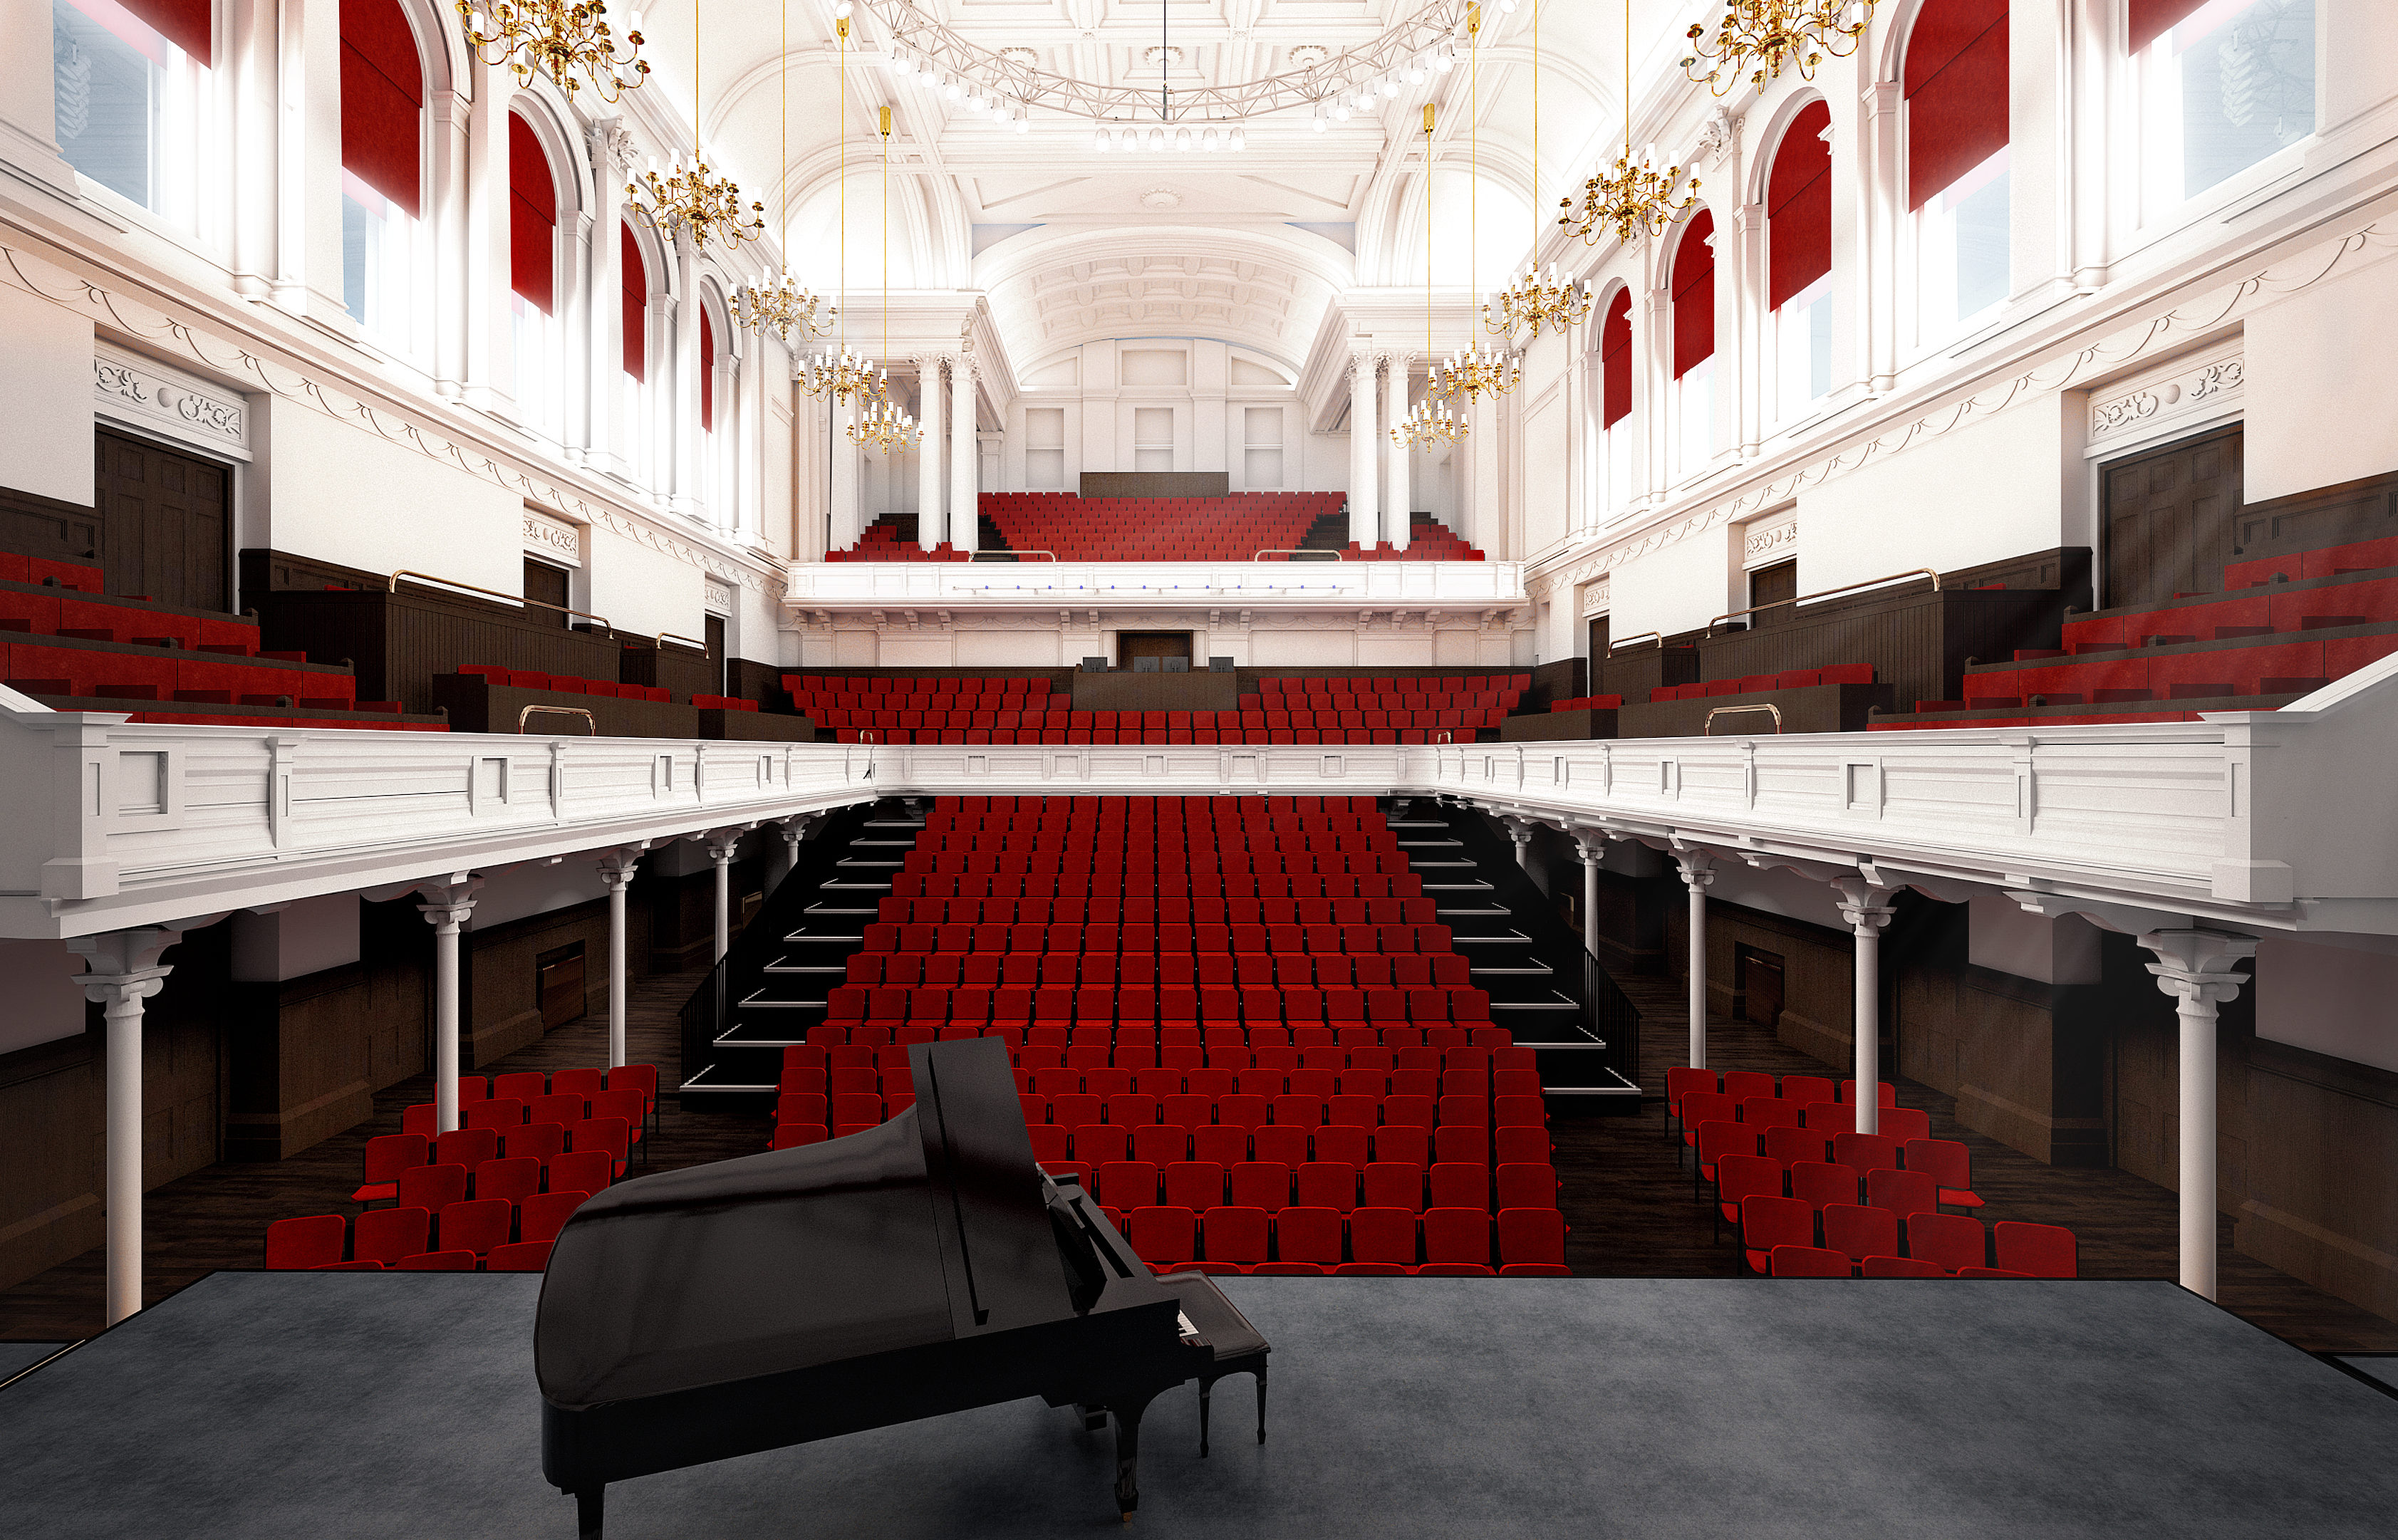 The vision for the new town hall interior (Renfrewshire Council)